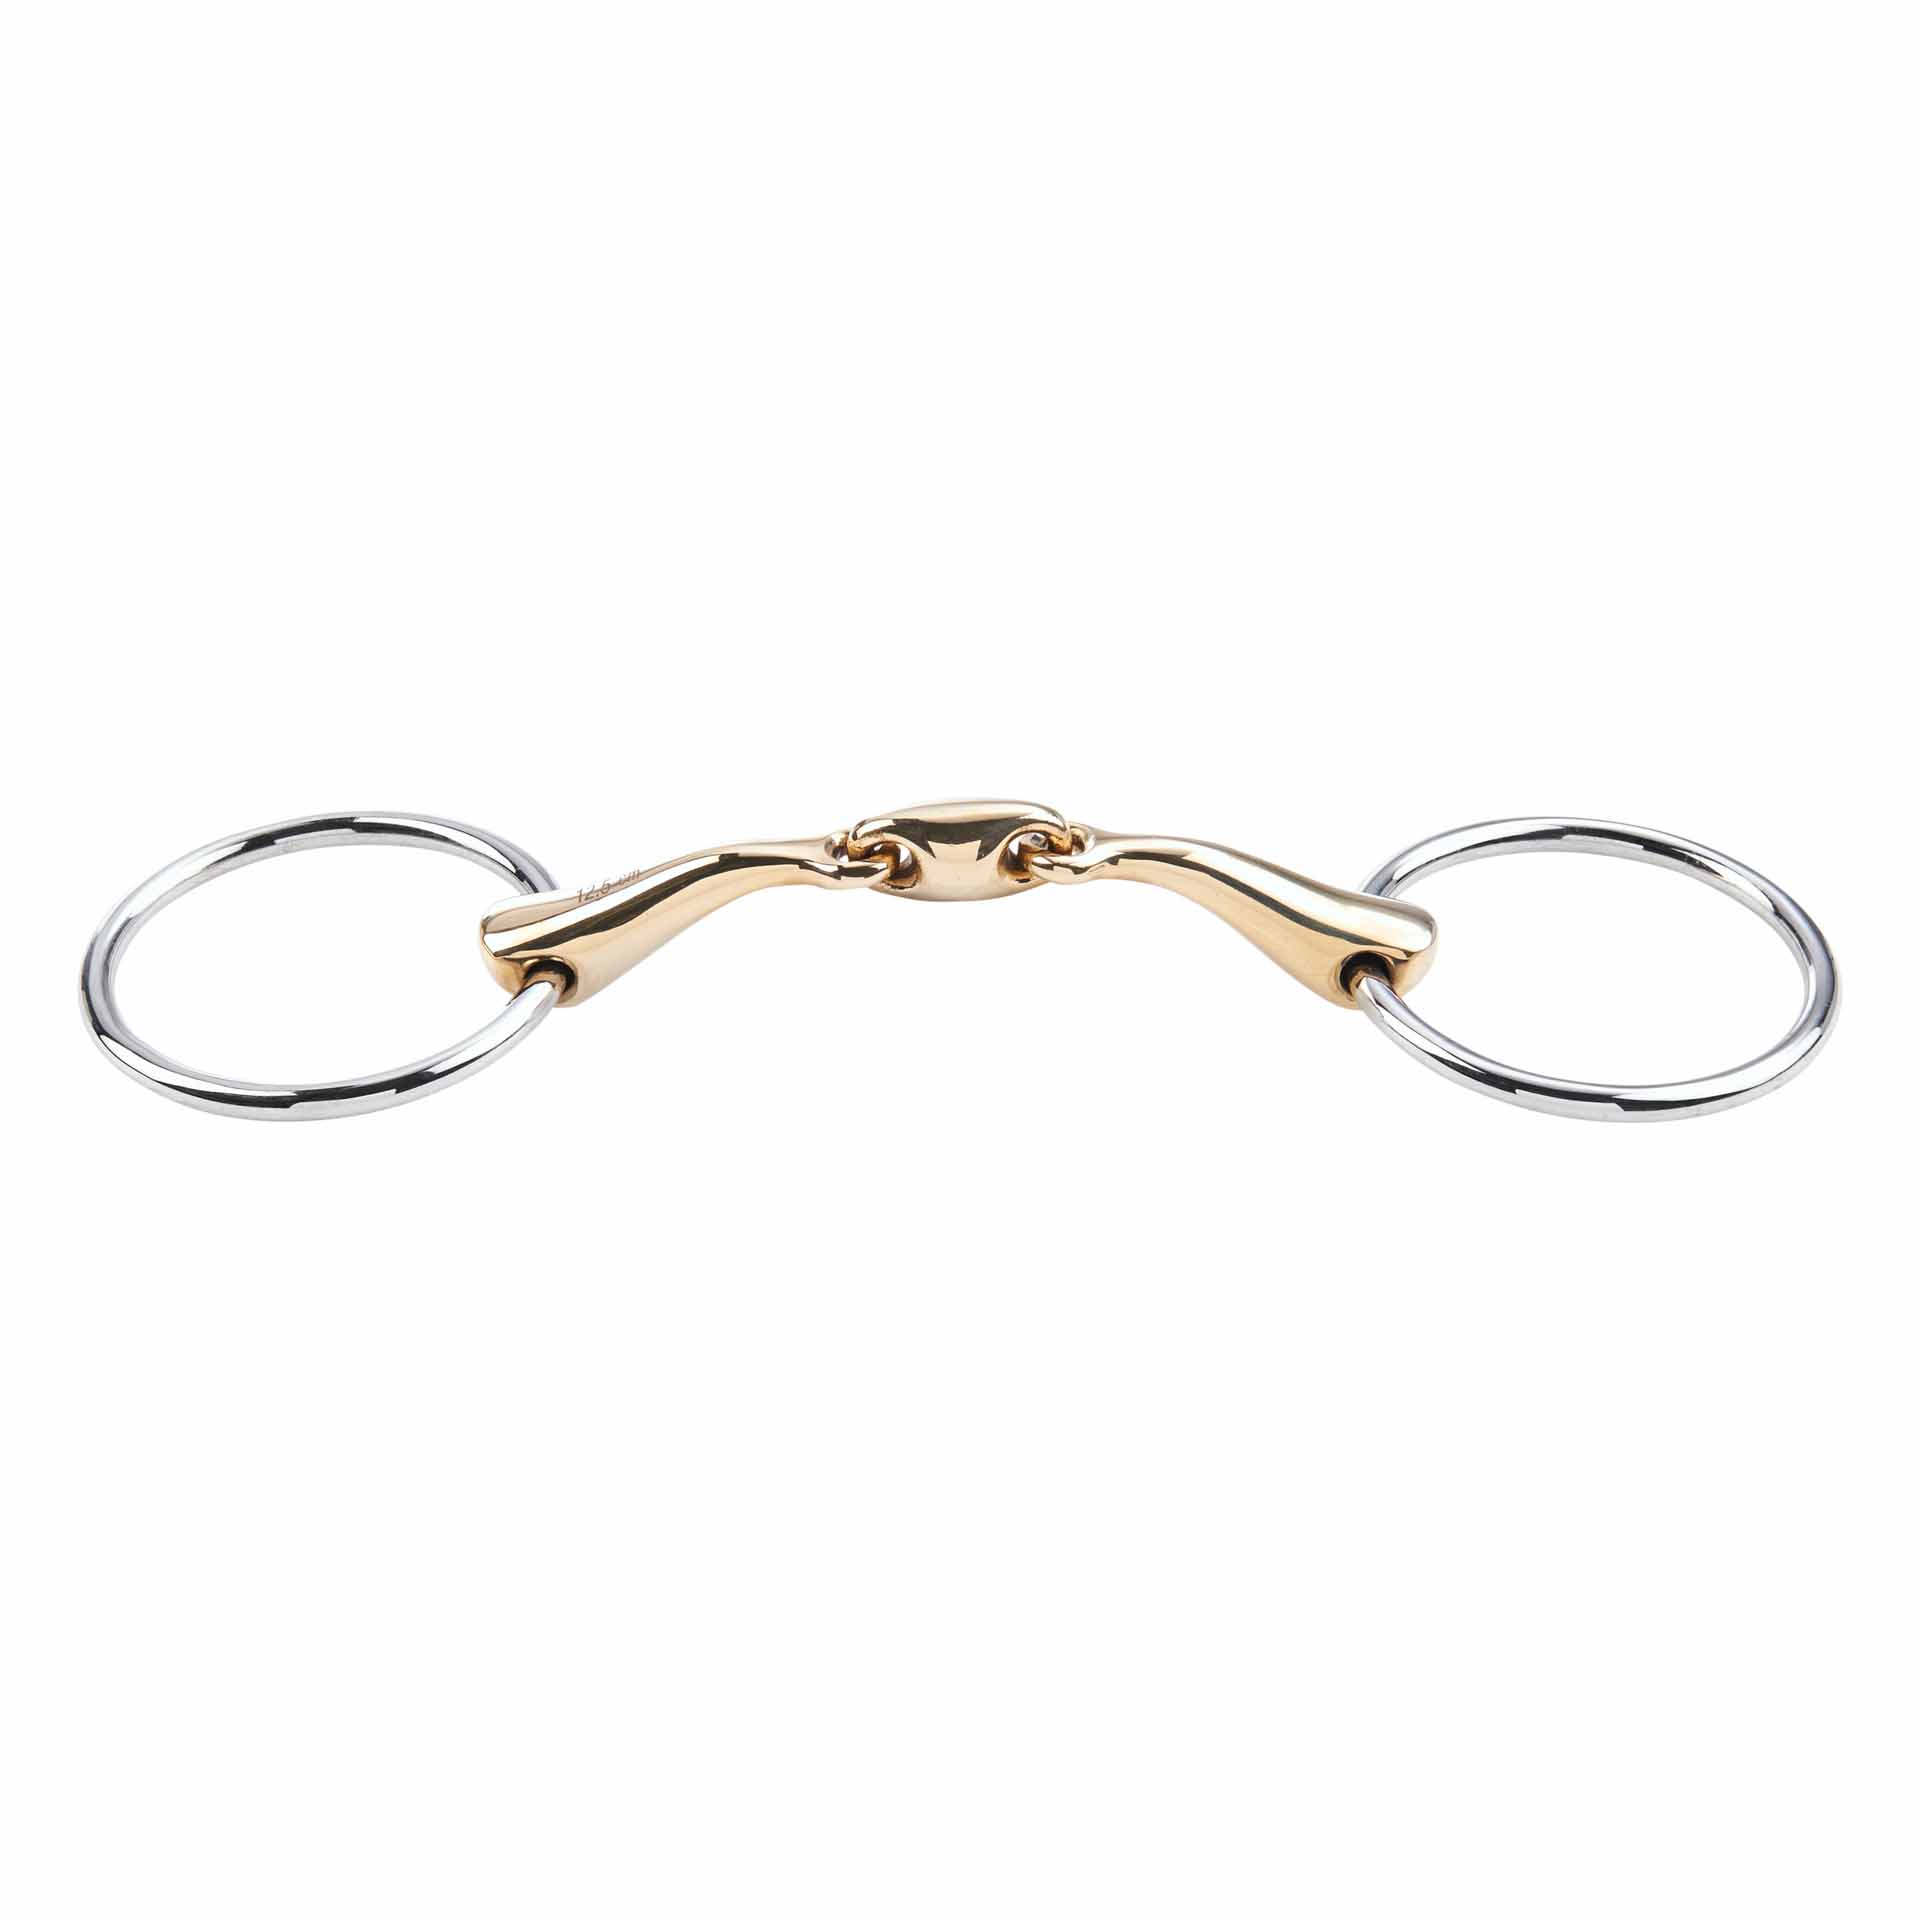 BUSSE Snaffle Bit KAUGAN®-SHAPED 16 mm, French-Link 11.5 cm/65 mm 